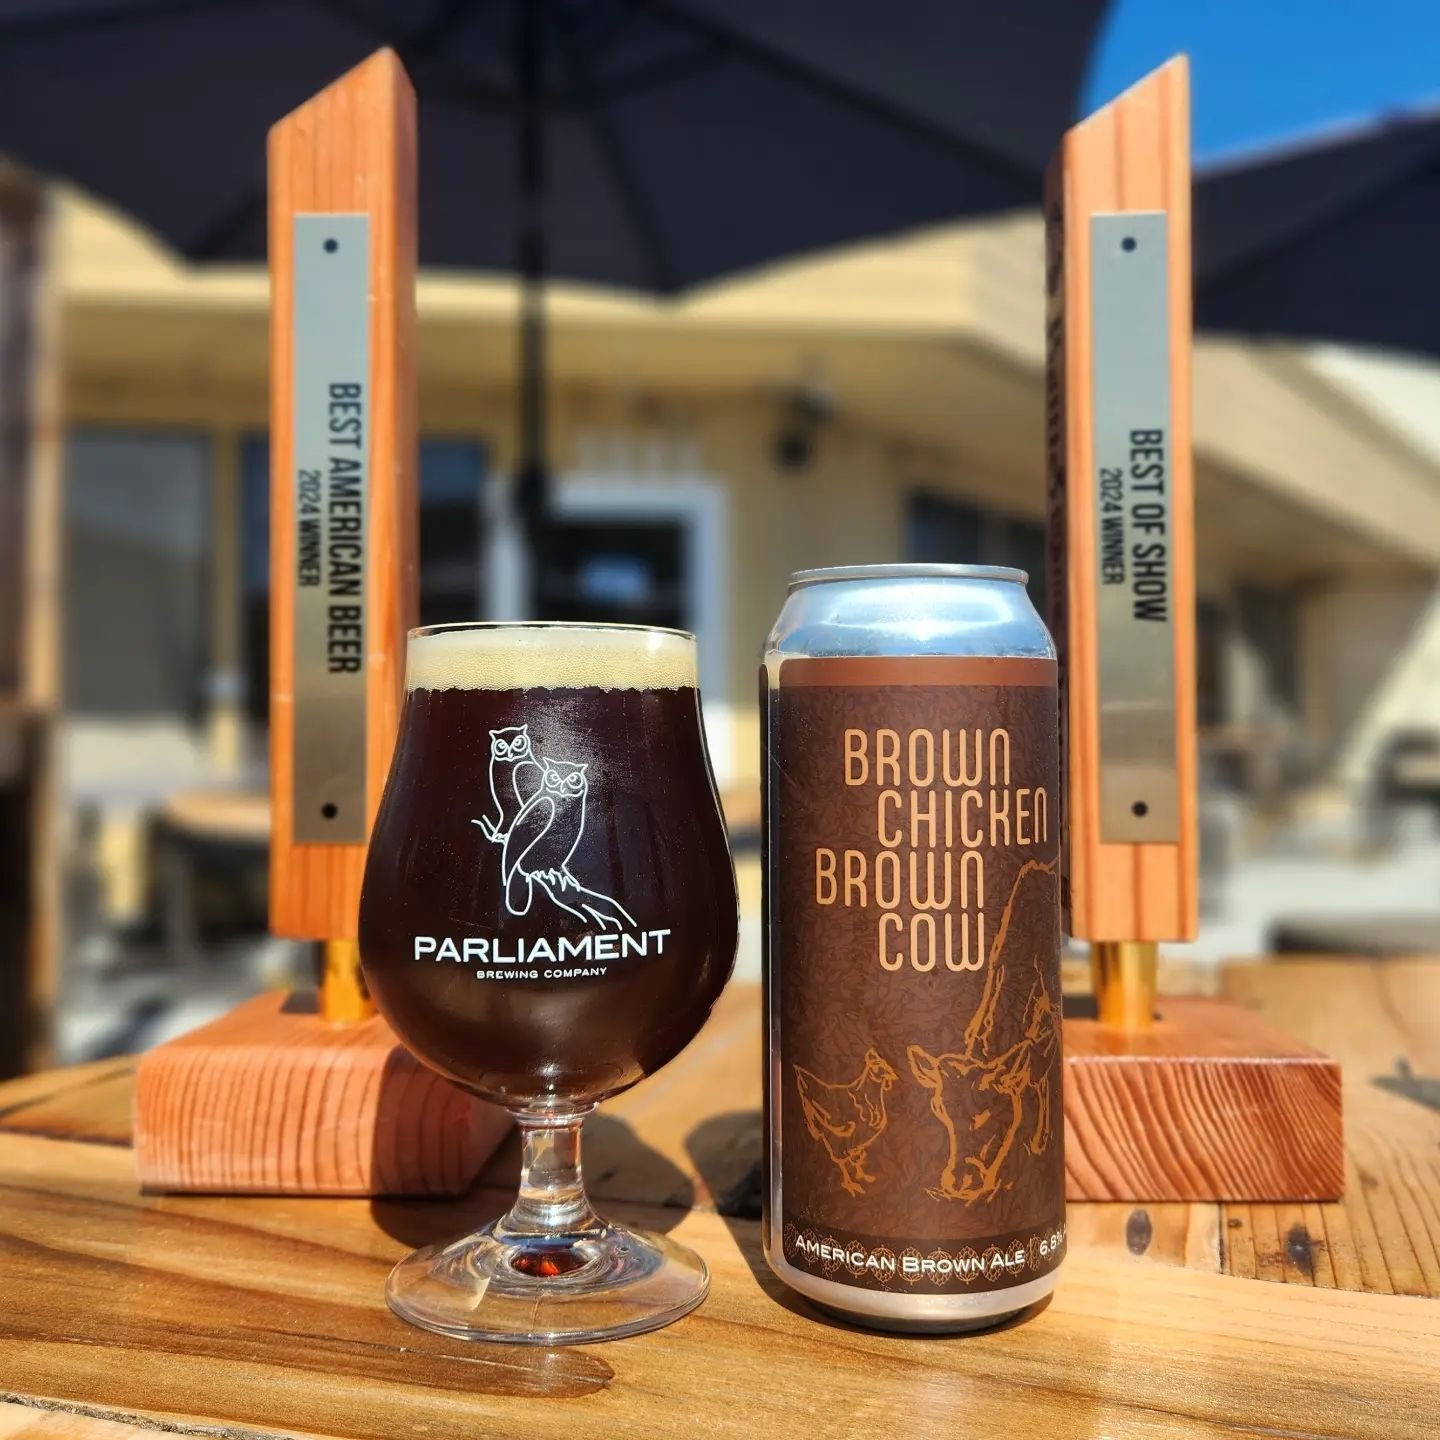 let's celebrate a best of show for brown chicken brown cow!

we had a great time pouring beer this past weekend at battle of the brews. winning best american ale and best of show for this beer was a huge bonus. we are flattered and thrilled for the r